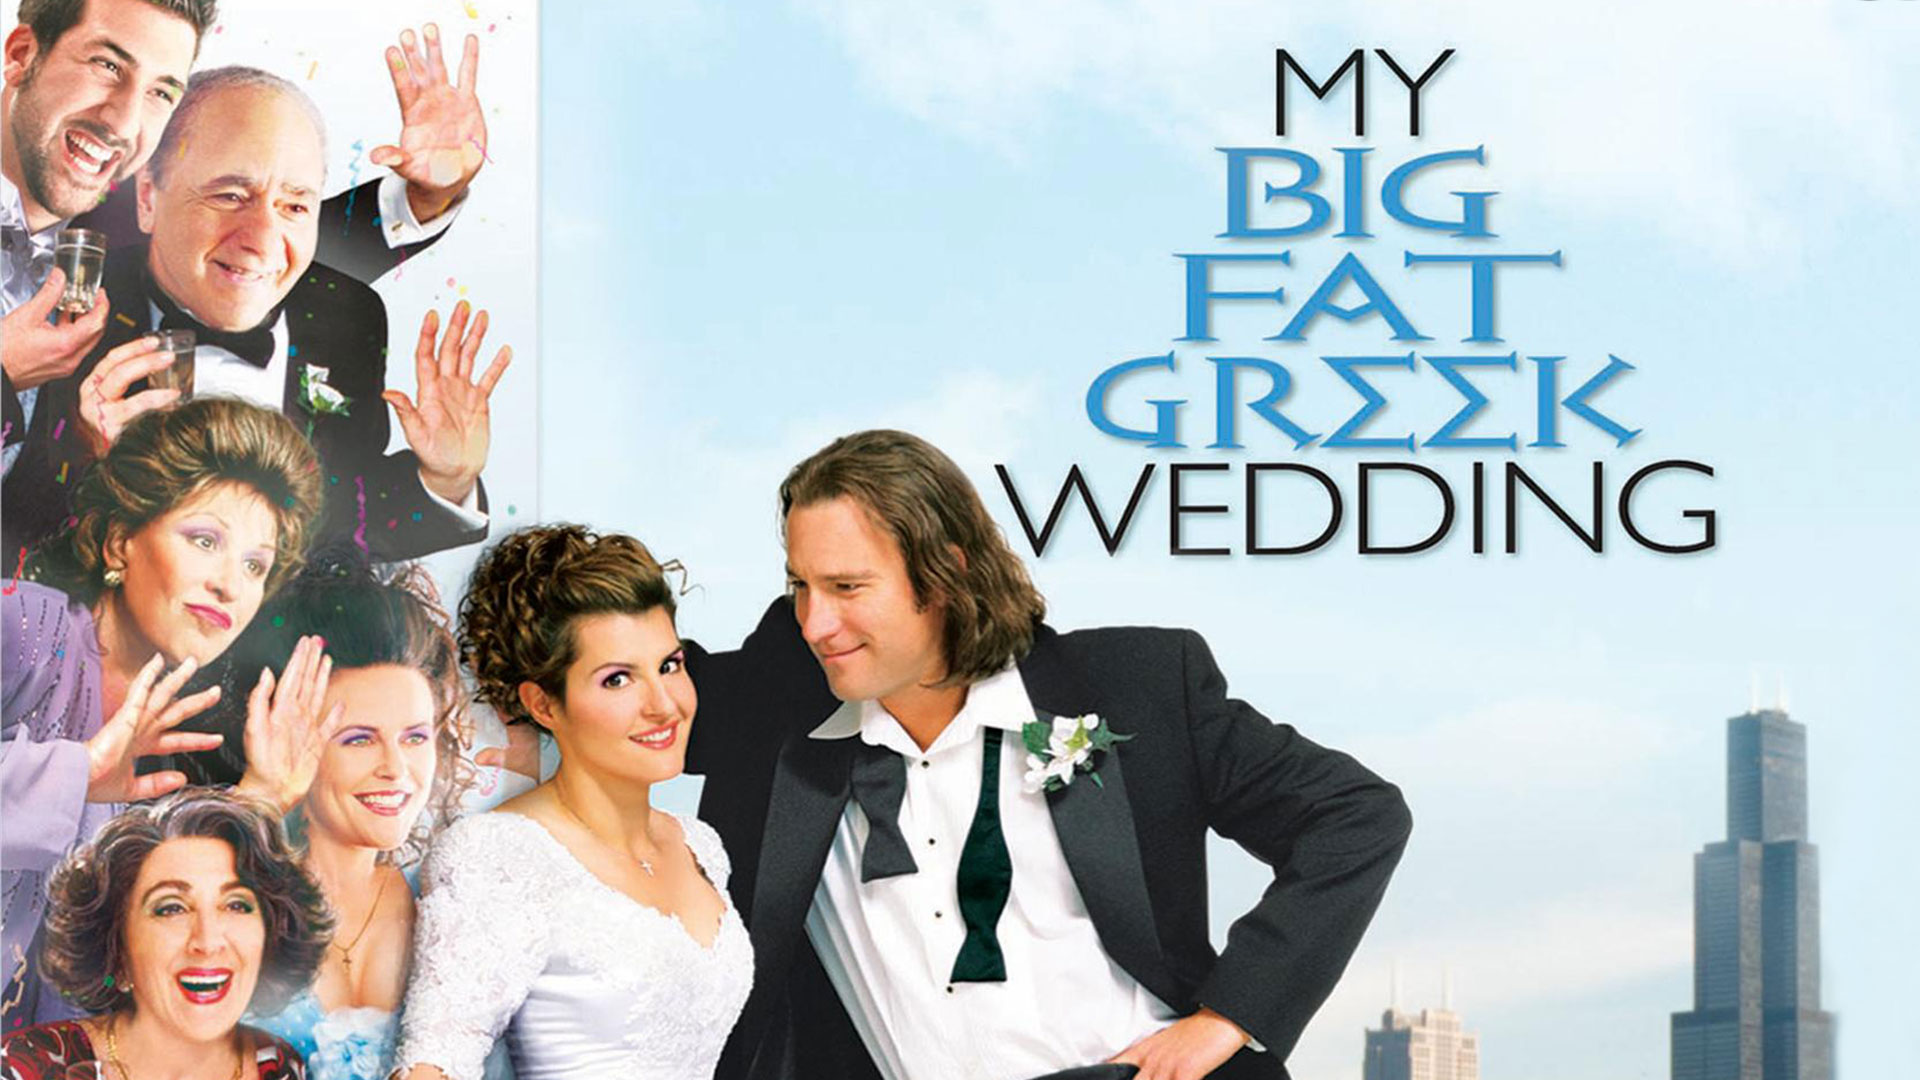 39-facts-about-the-movie-my-big-fat-greek-wedding